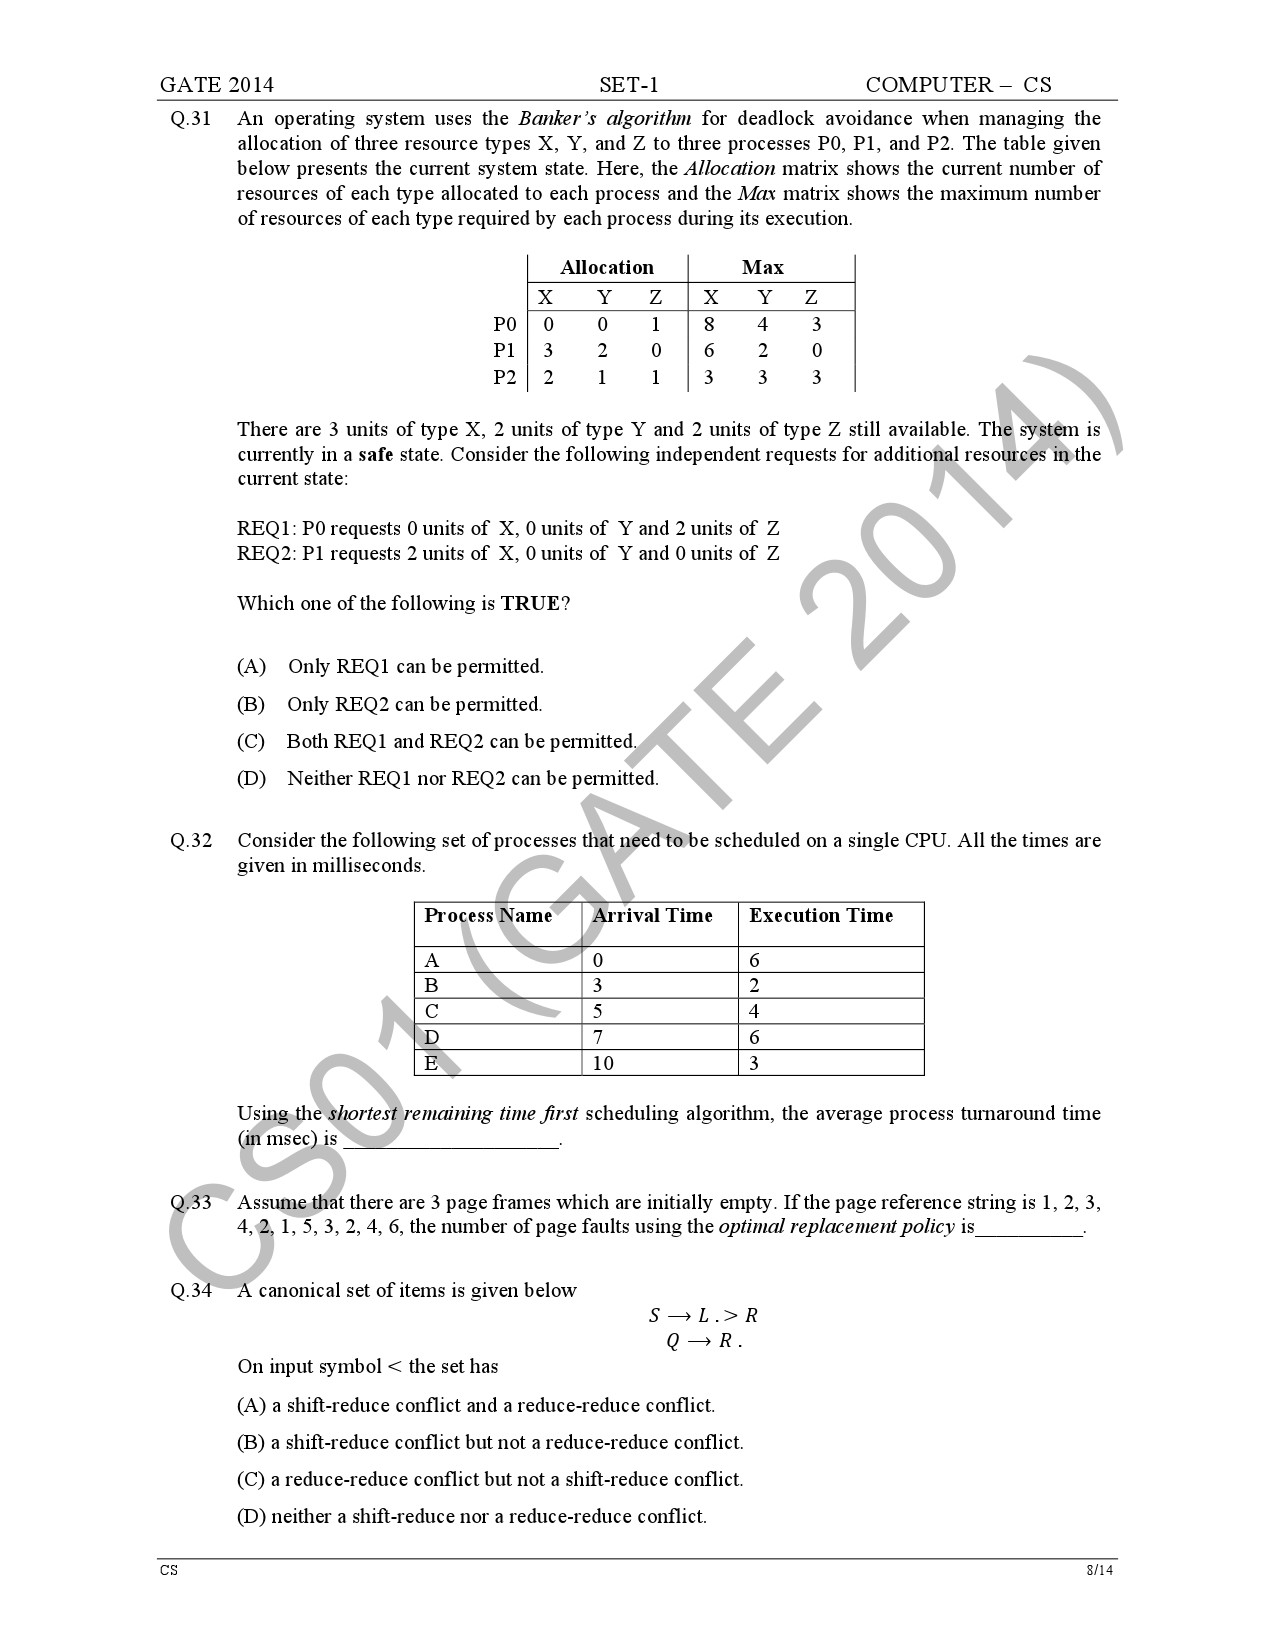 GATE Exam Question Paper 2014 Computer Science and Information Technology Set 1 14